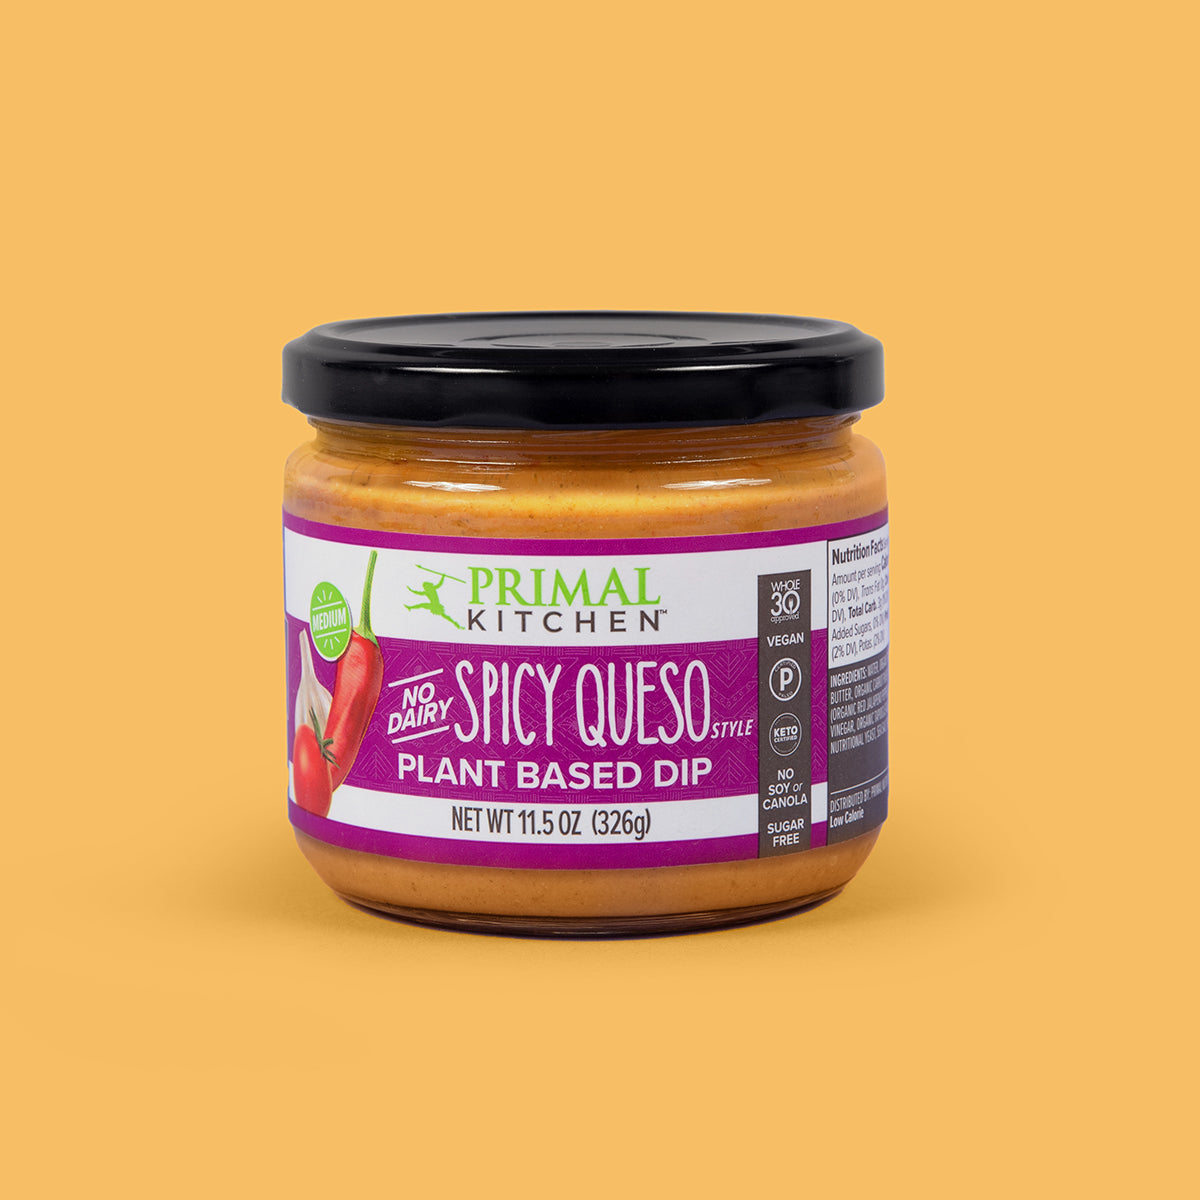 A jar of Primal Kitchen Vegan No Dairy Spicy Queso Style Plant Based Dip with a dark purple label on an orange background.